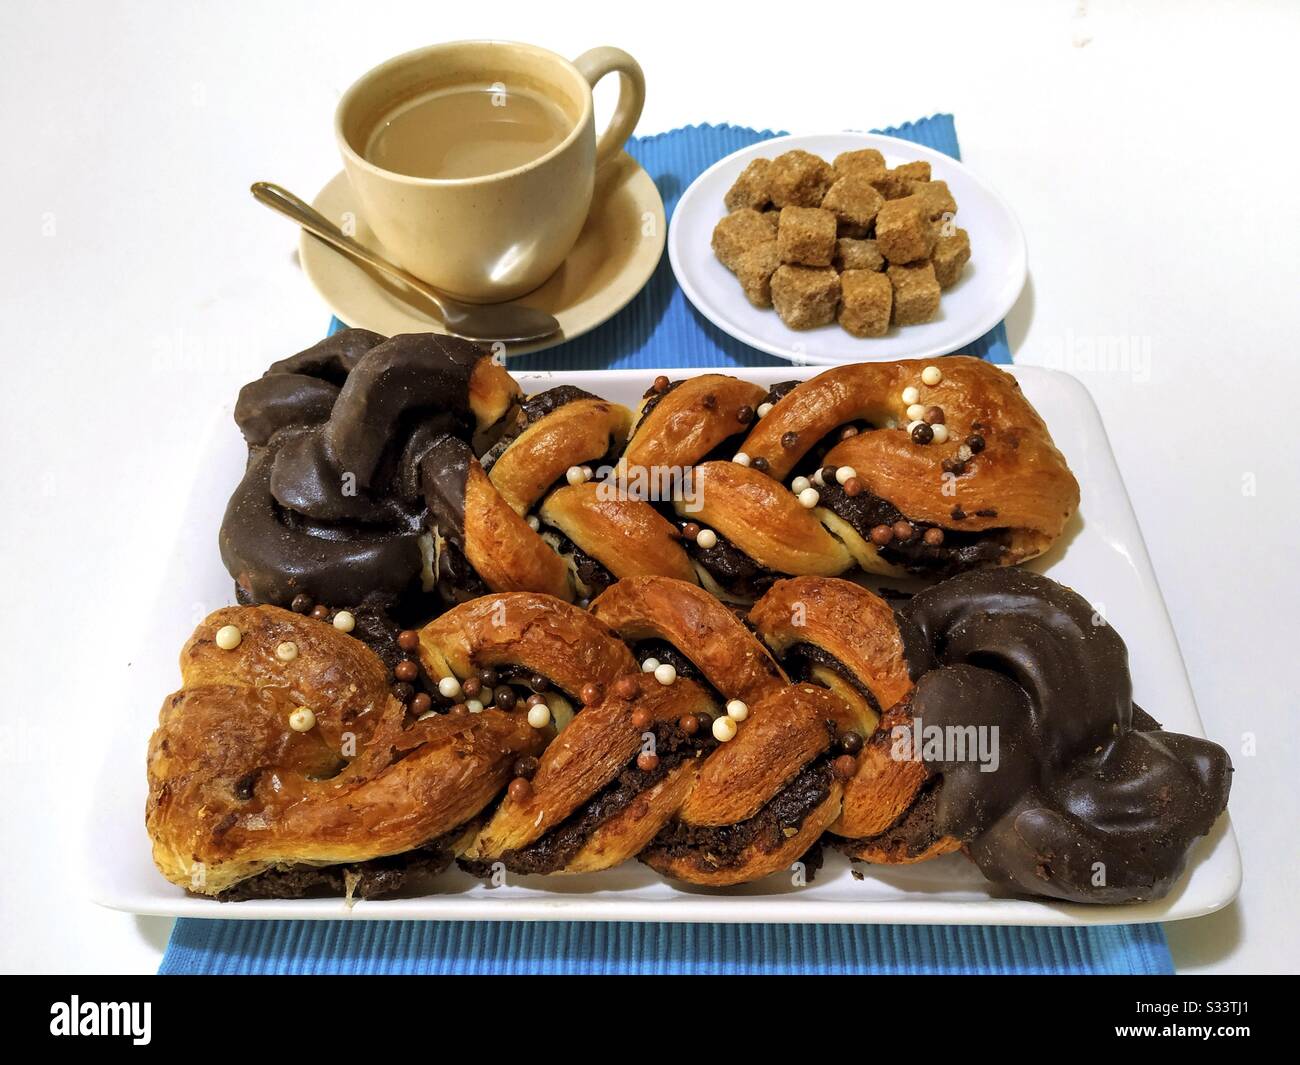 Pastries with white coffee. Stock Photo